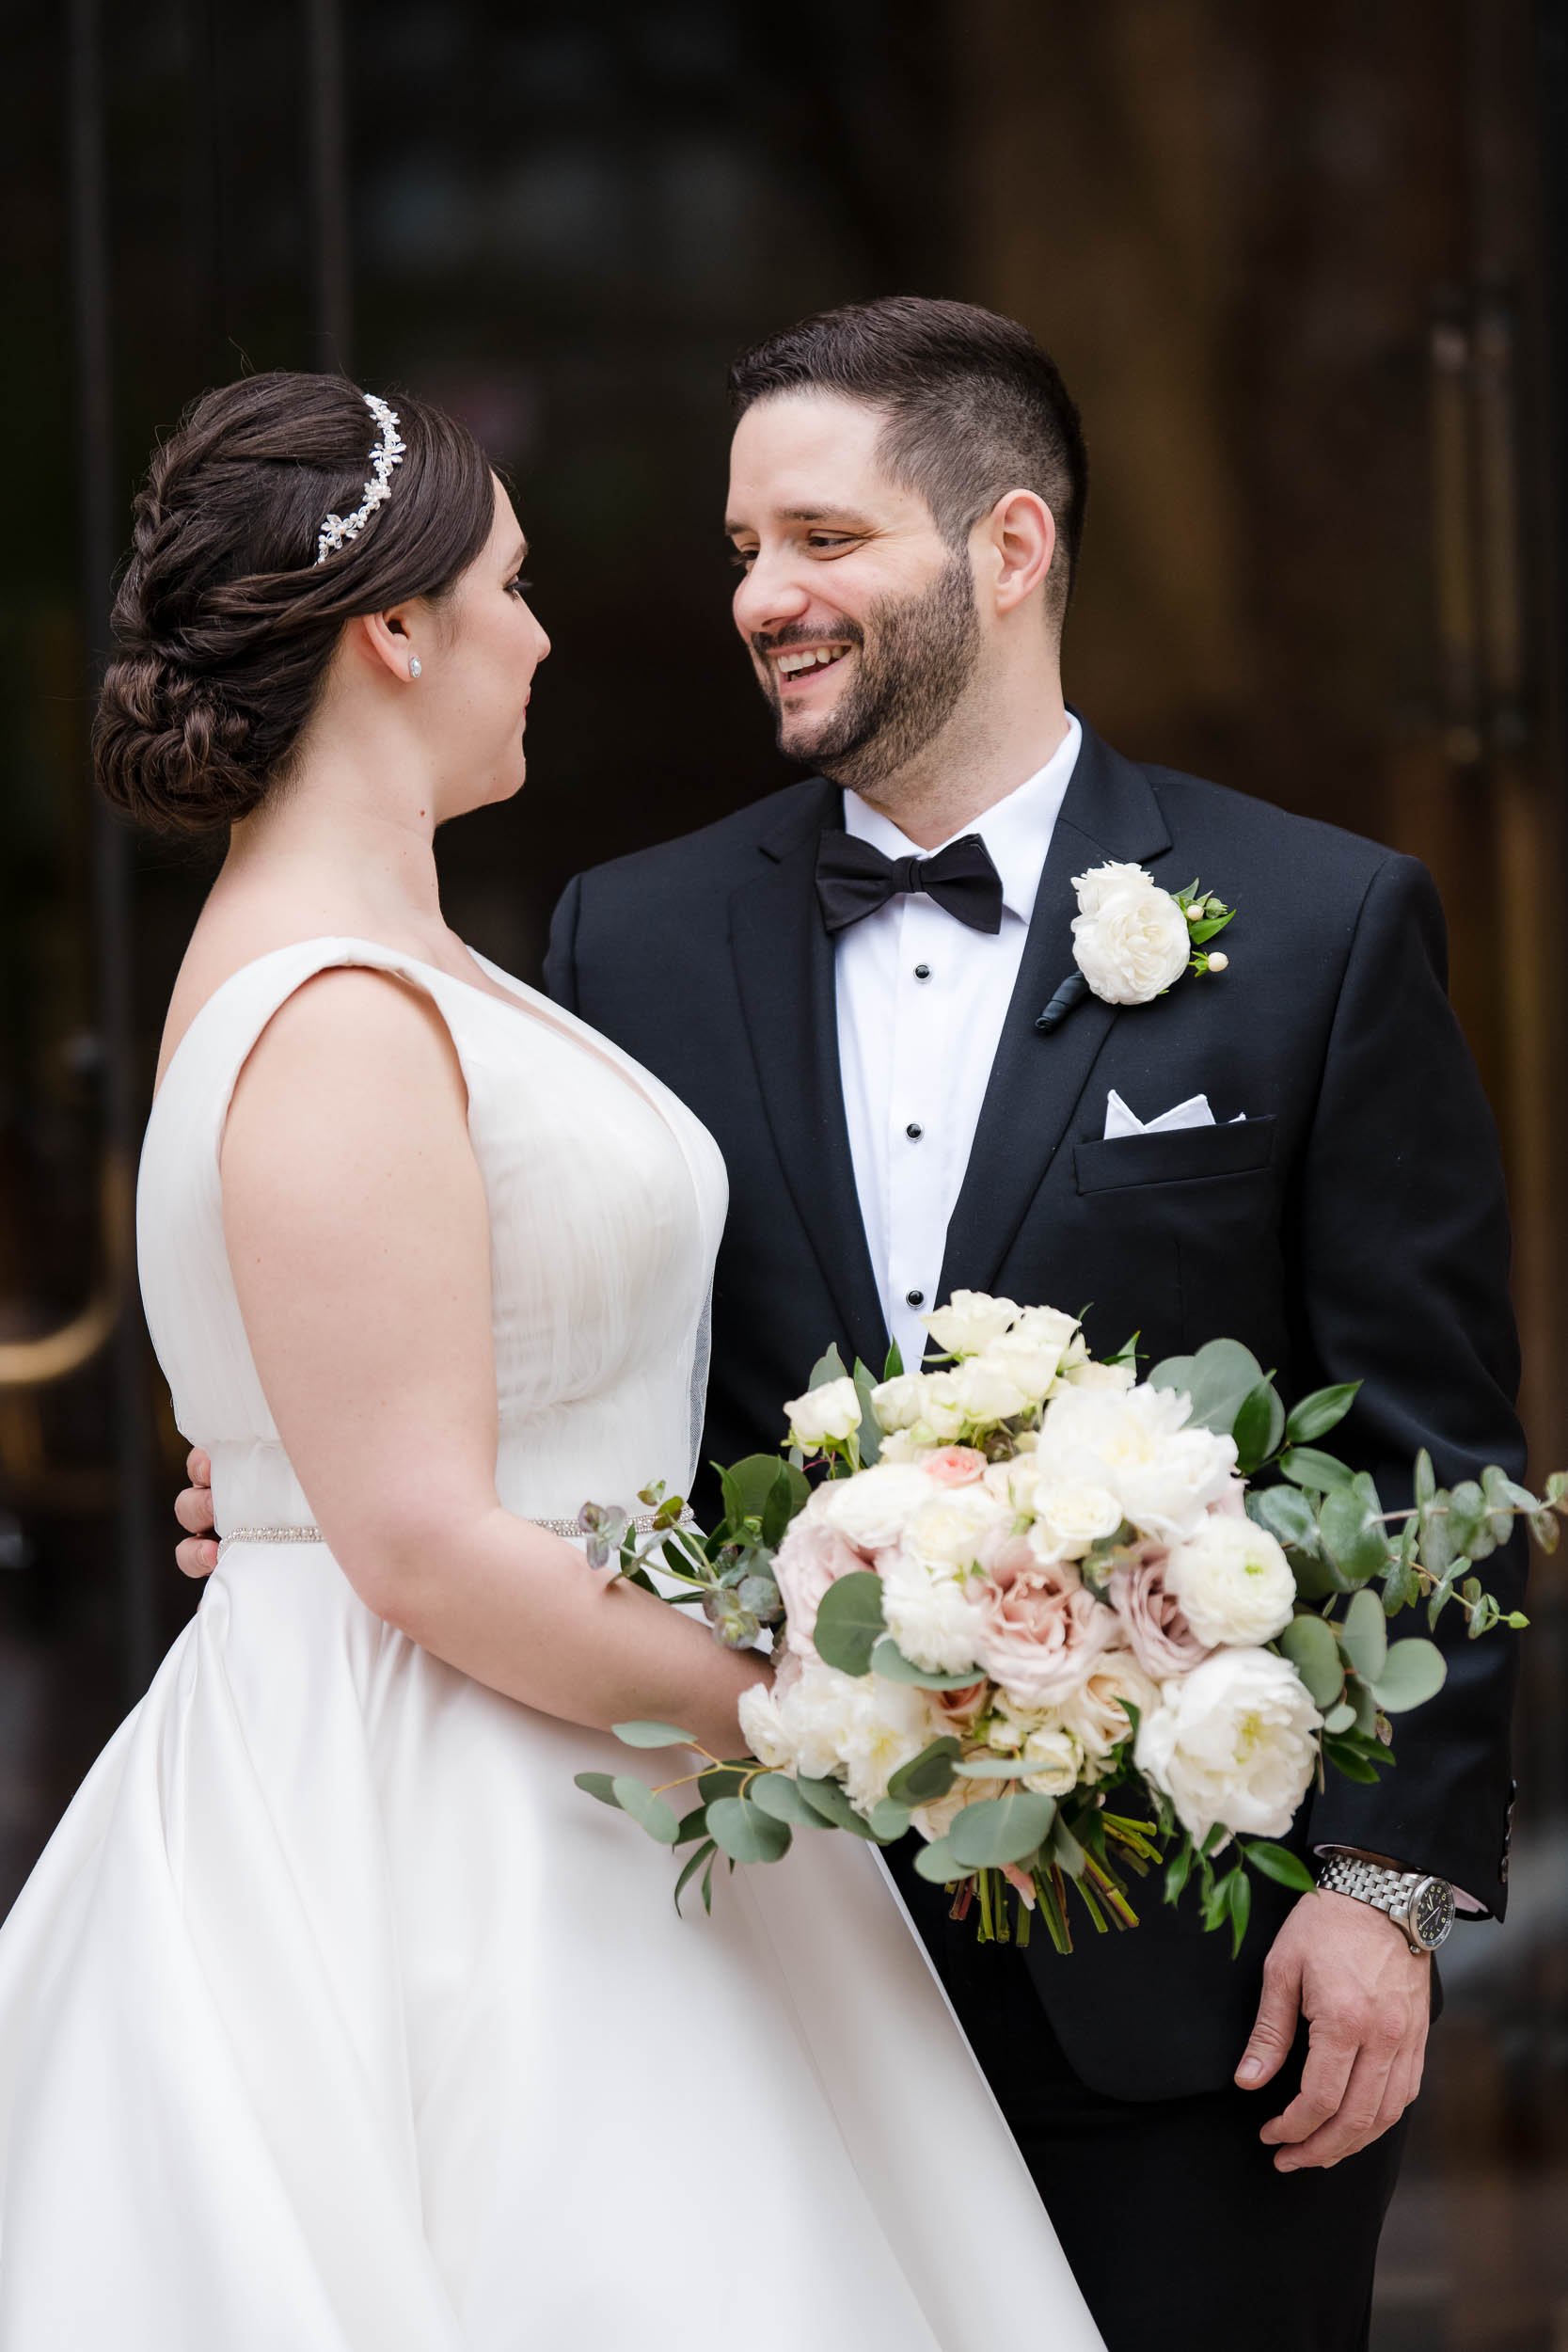 Wedding Day Photos | Newberry Library | J. Brown Photography | bride and groom portrait.  